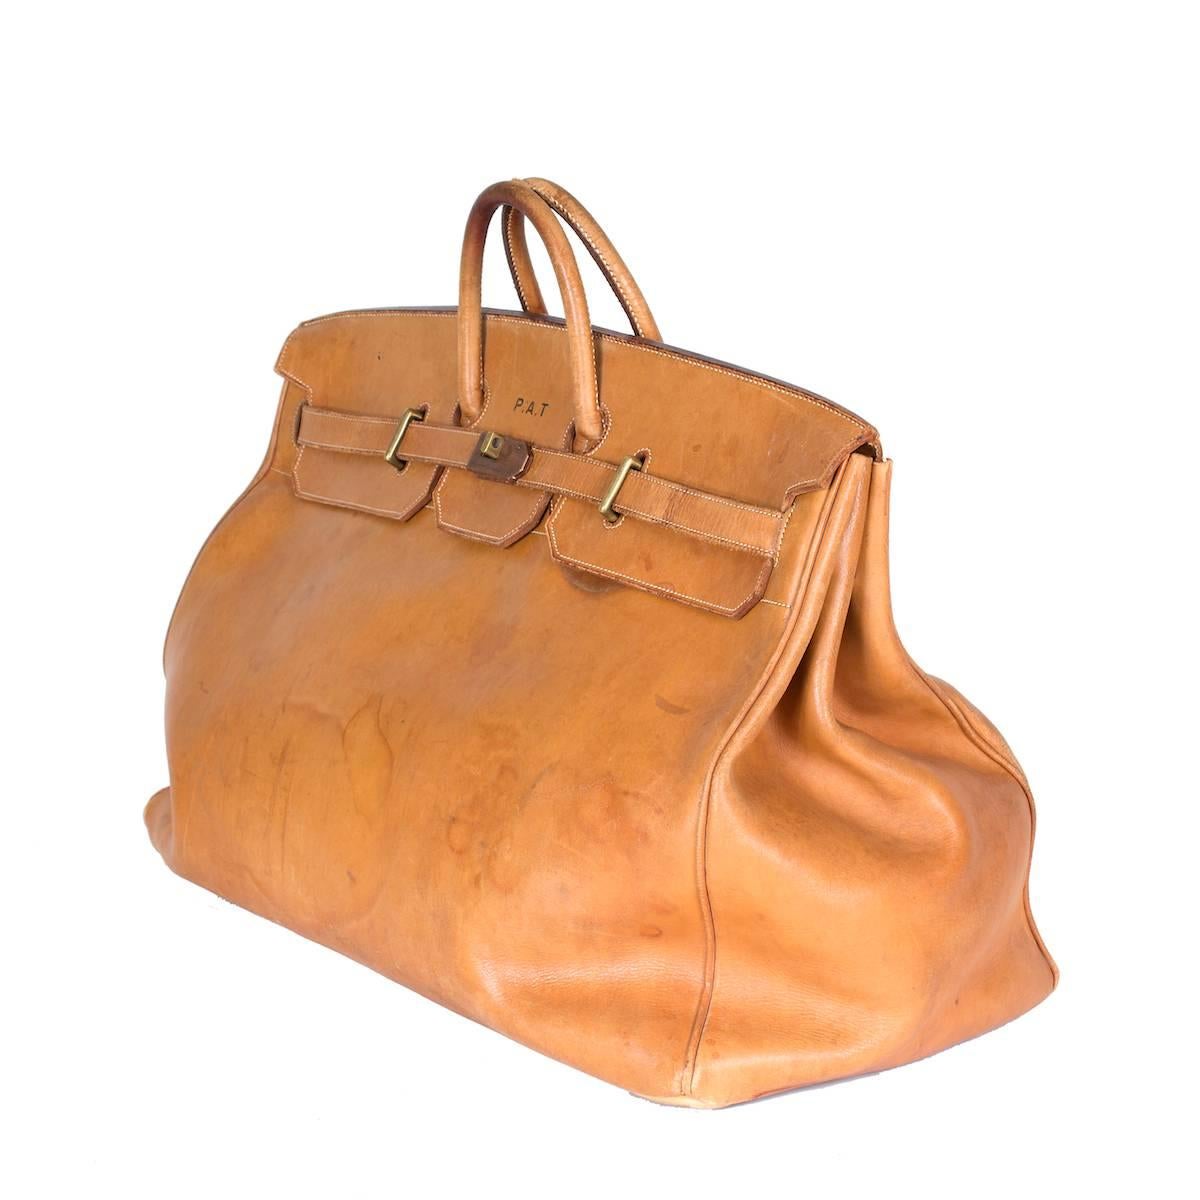 This is a vintage luggage piece from Hermes pre 1971.  It is made with a smooth natural color tan leather.

24